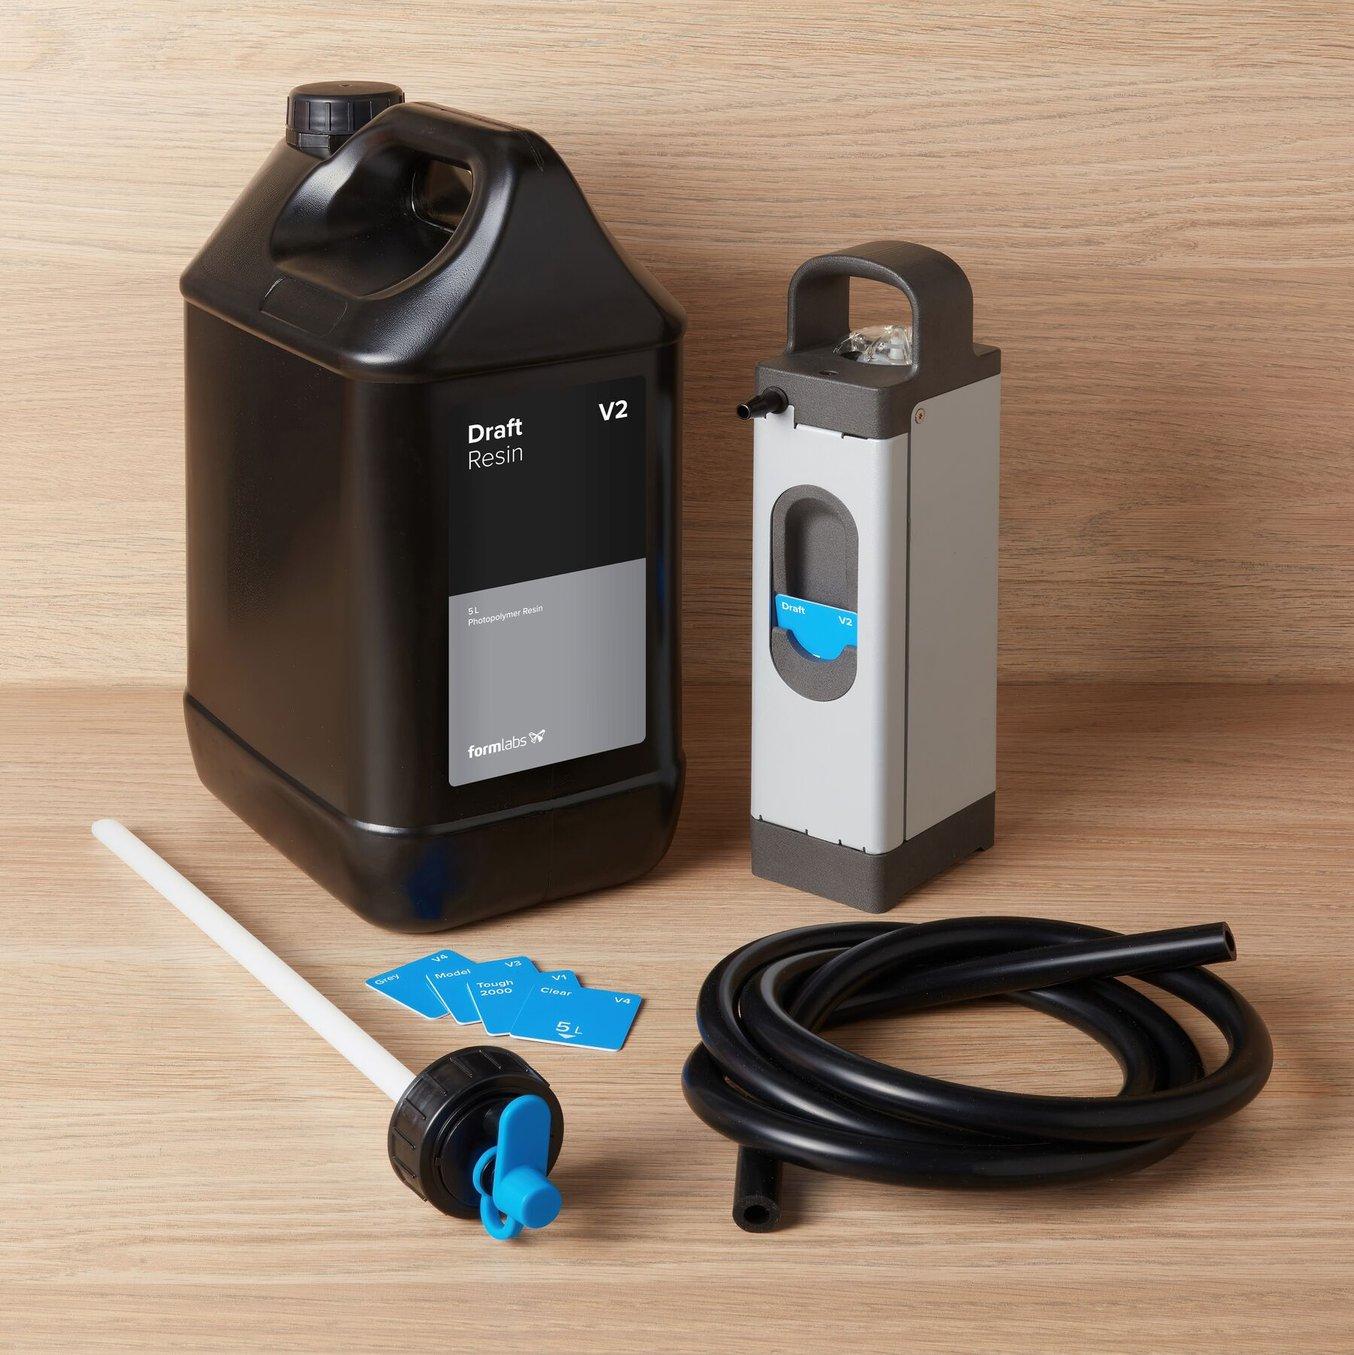 The Resin Pumping System including a 5 L Container of Draft Resin, tube, and card